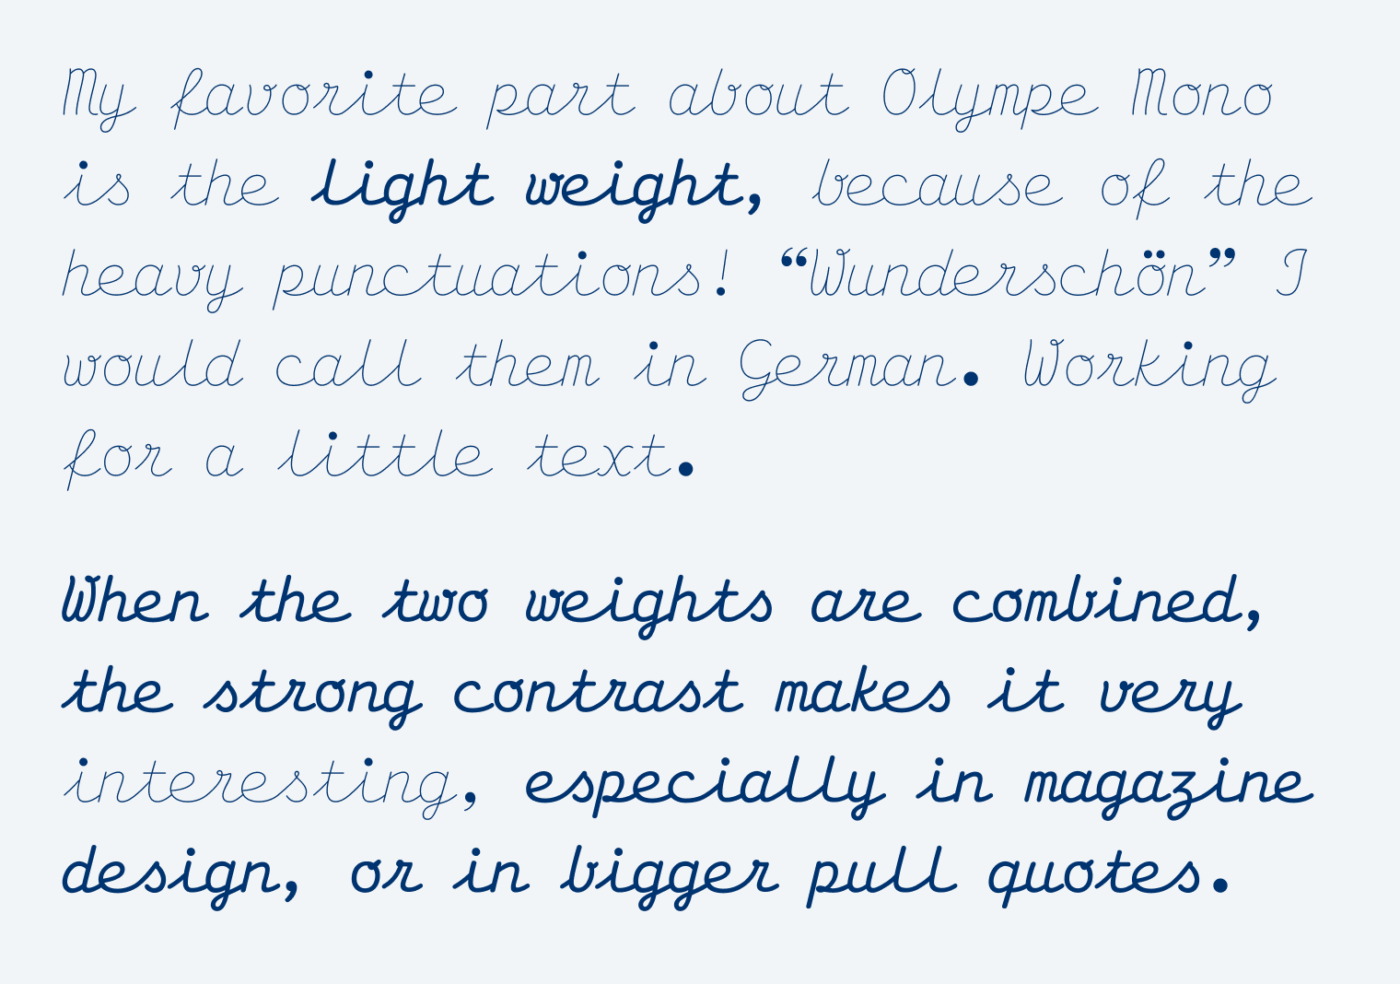 My favorite part about Olympe Mono is the light weight, because of the heavy punctuations! “Wunderschön” I would call them in German. Working for a little text. When the two weights are combined, the strong contrast makes it very interesting, especially in magazine design, or in bigger pull quotes.